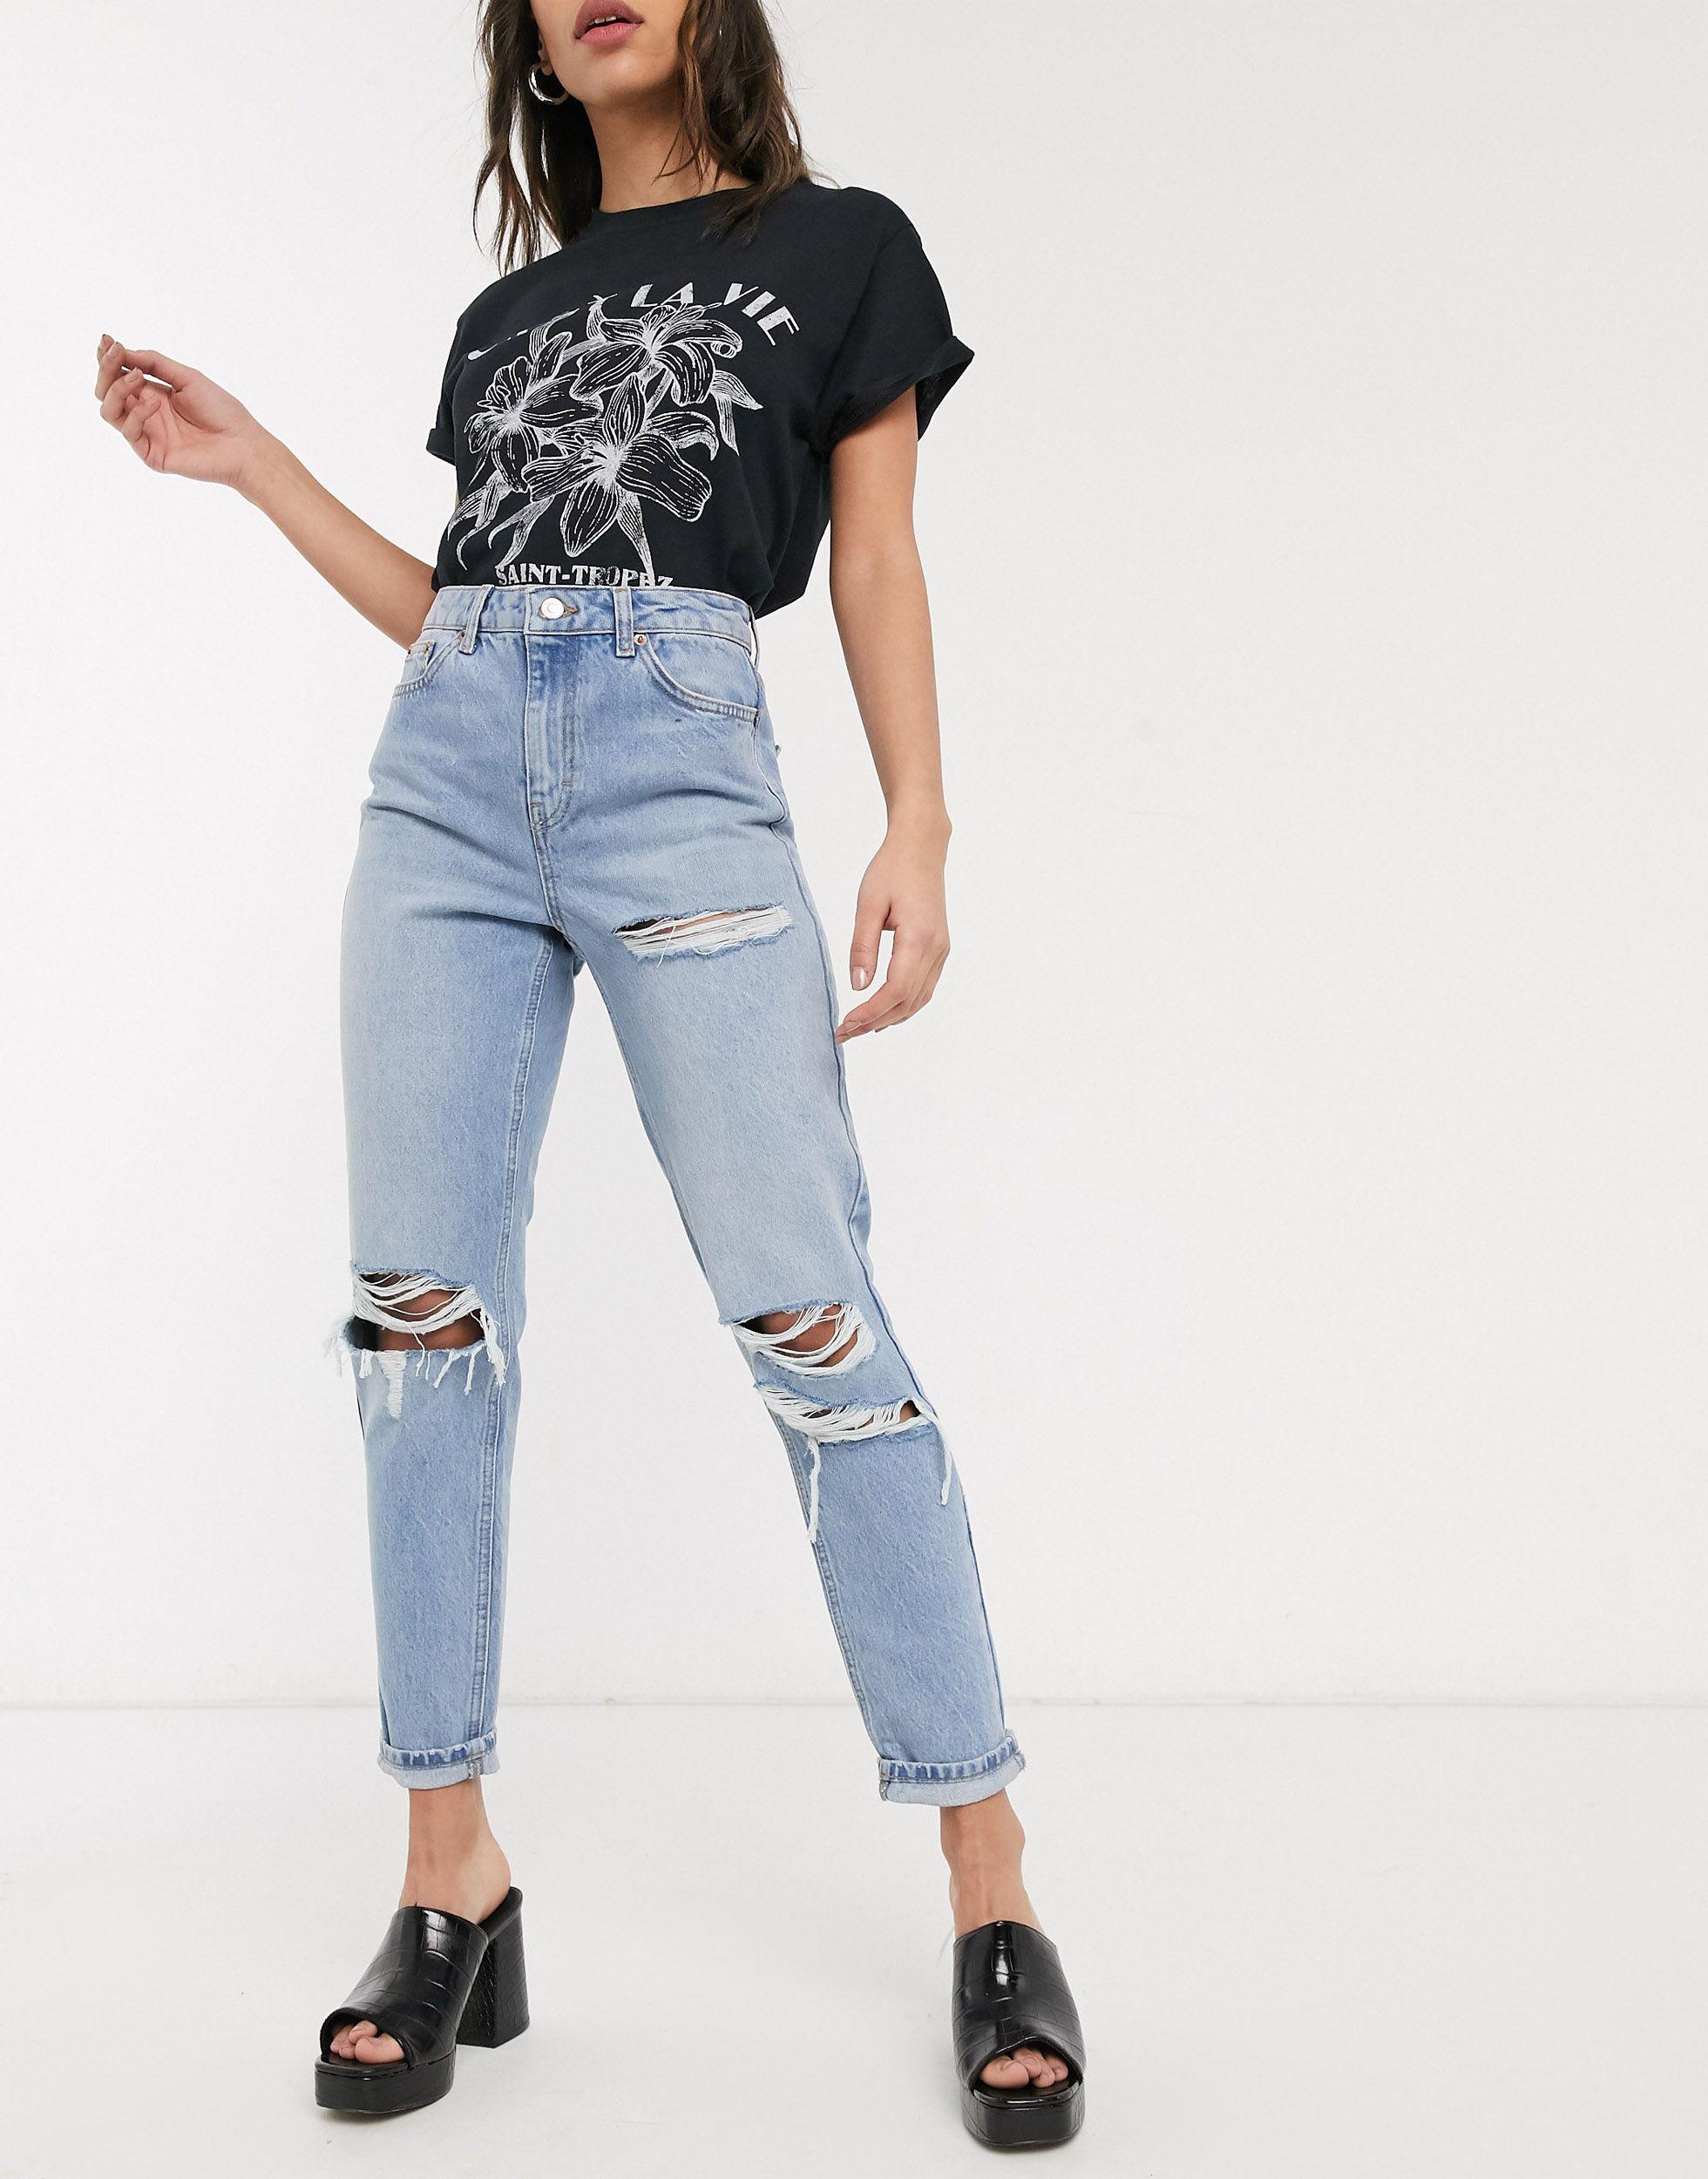 ripped topshop jeans